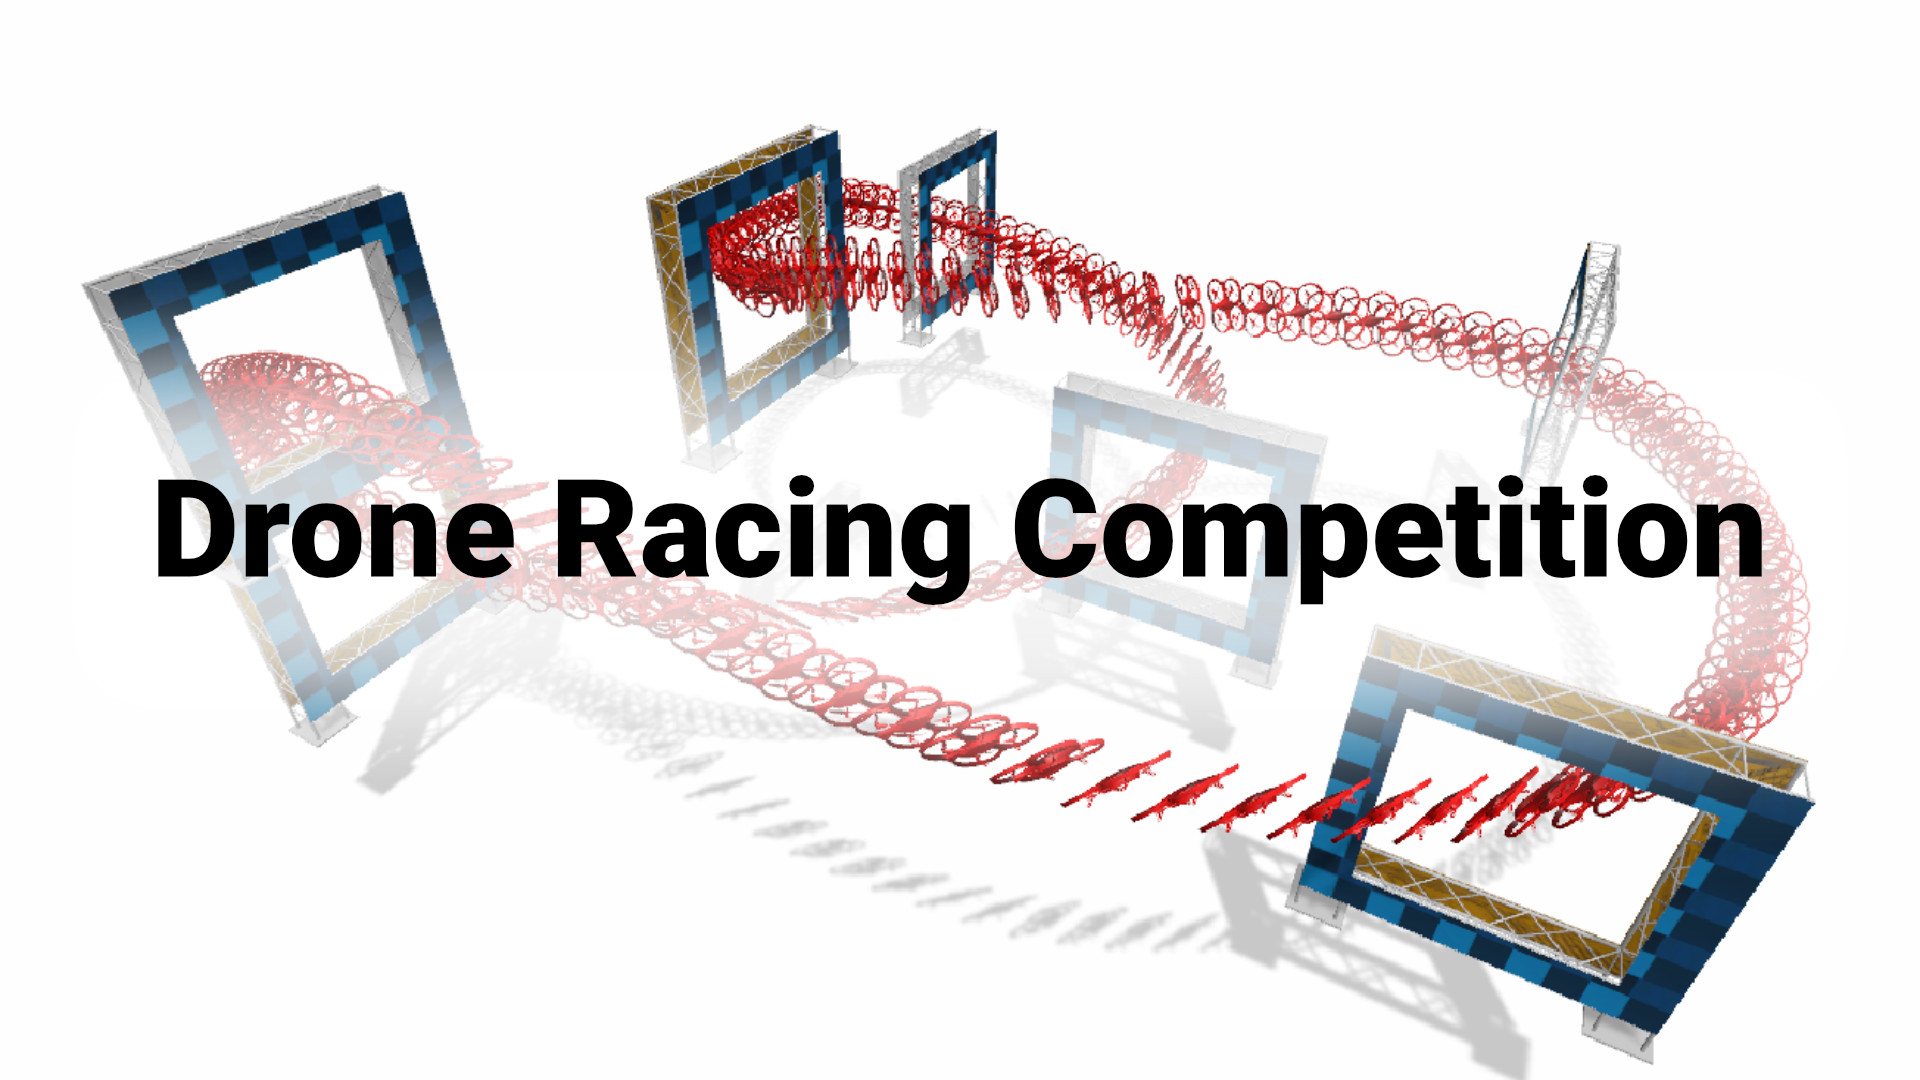 Drone Racing Competition